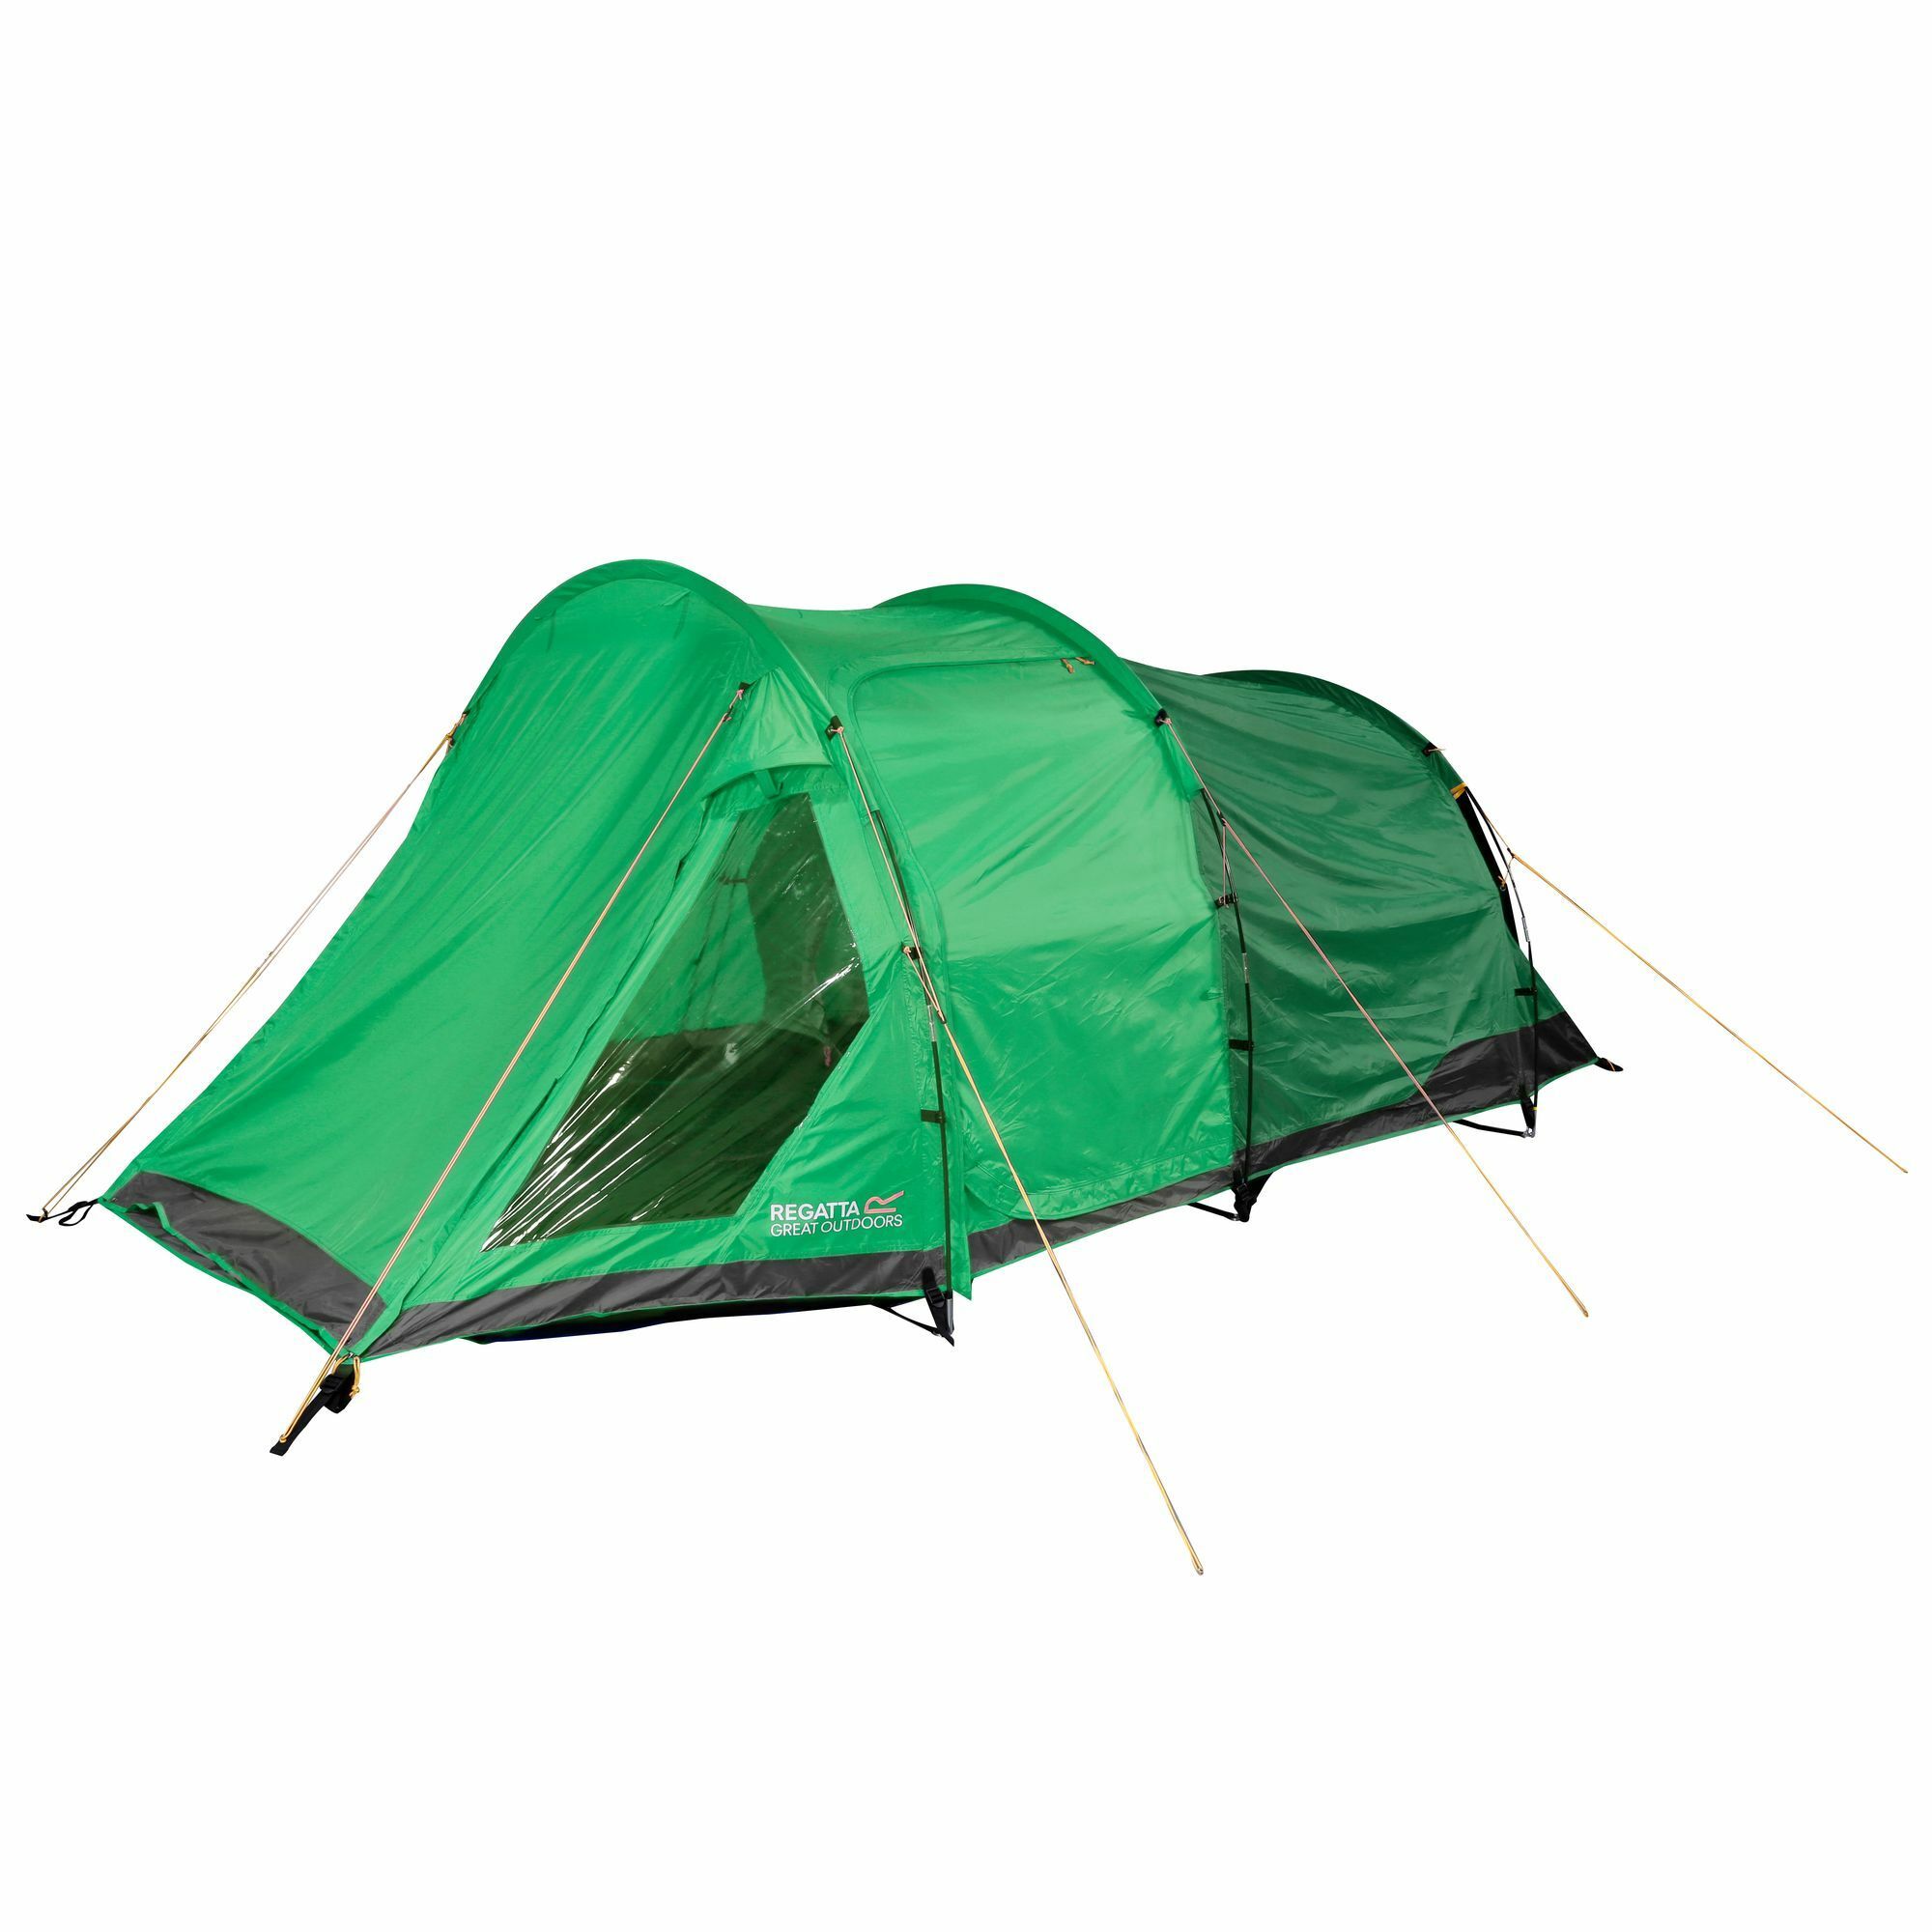 Vester 4 Man Tunnel Tent Extreme Green